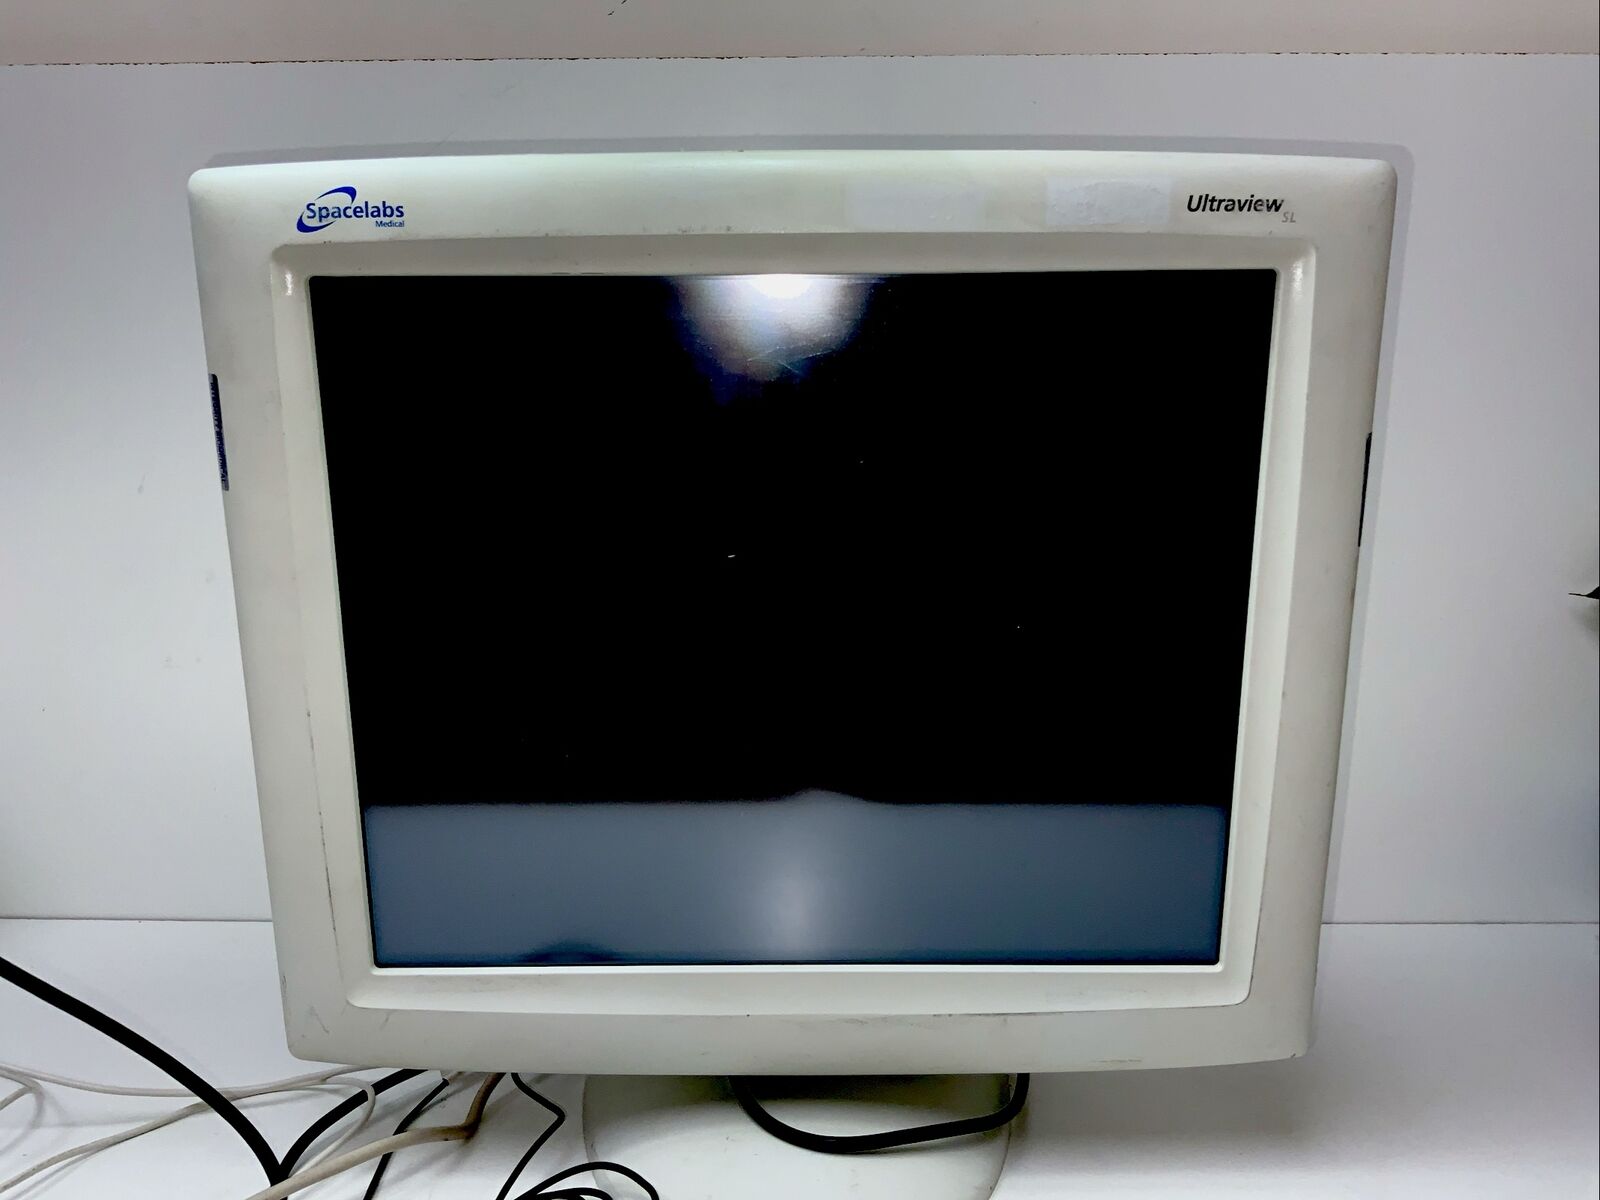 Spacelabs Ultraview SL  Touchscreen Medical Monitor E230760